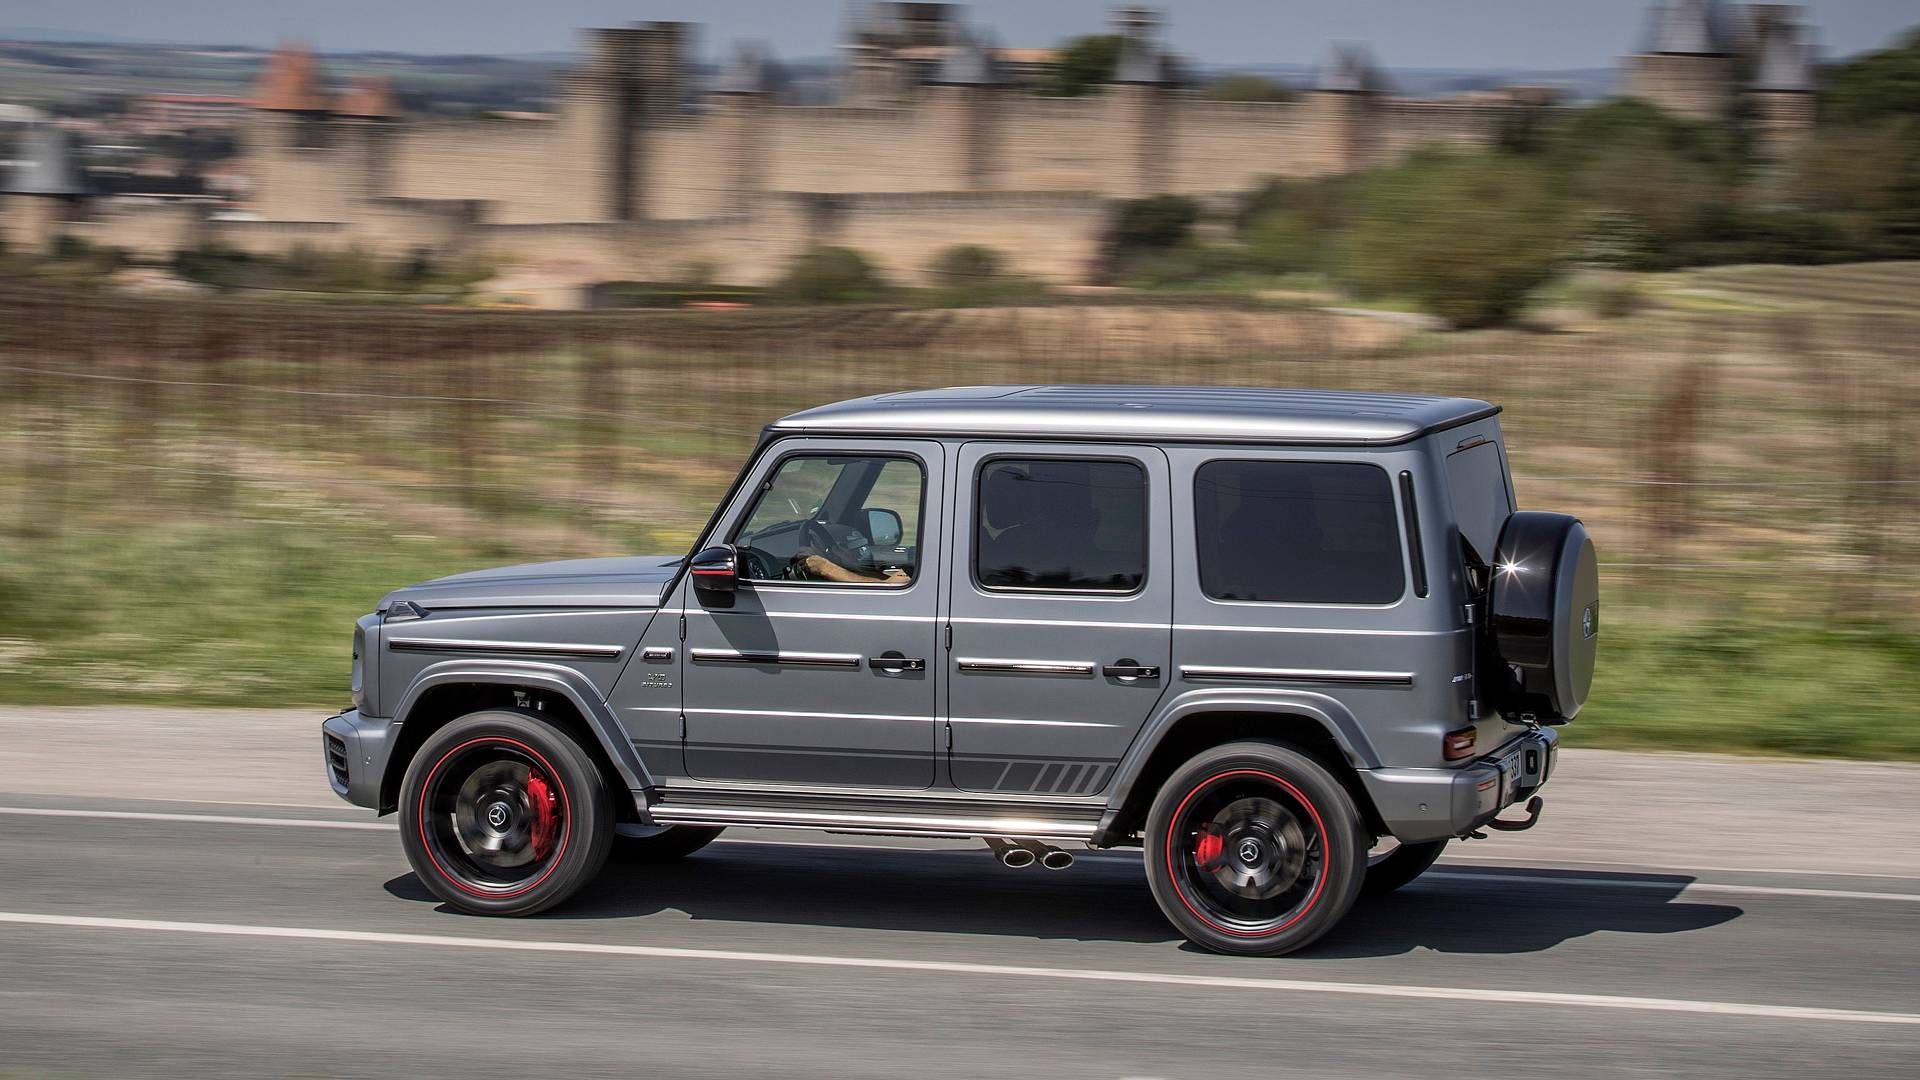 2018 Mercedes-AMG G63 first drive: Military SUV with supercar swagger